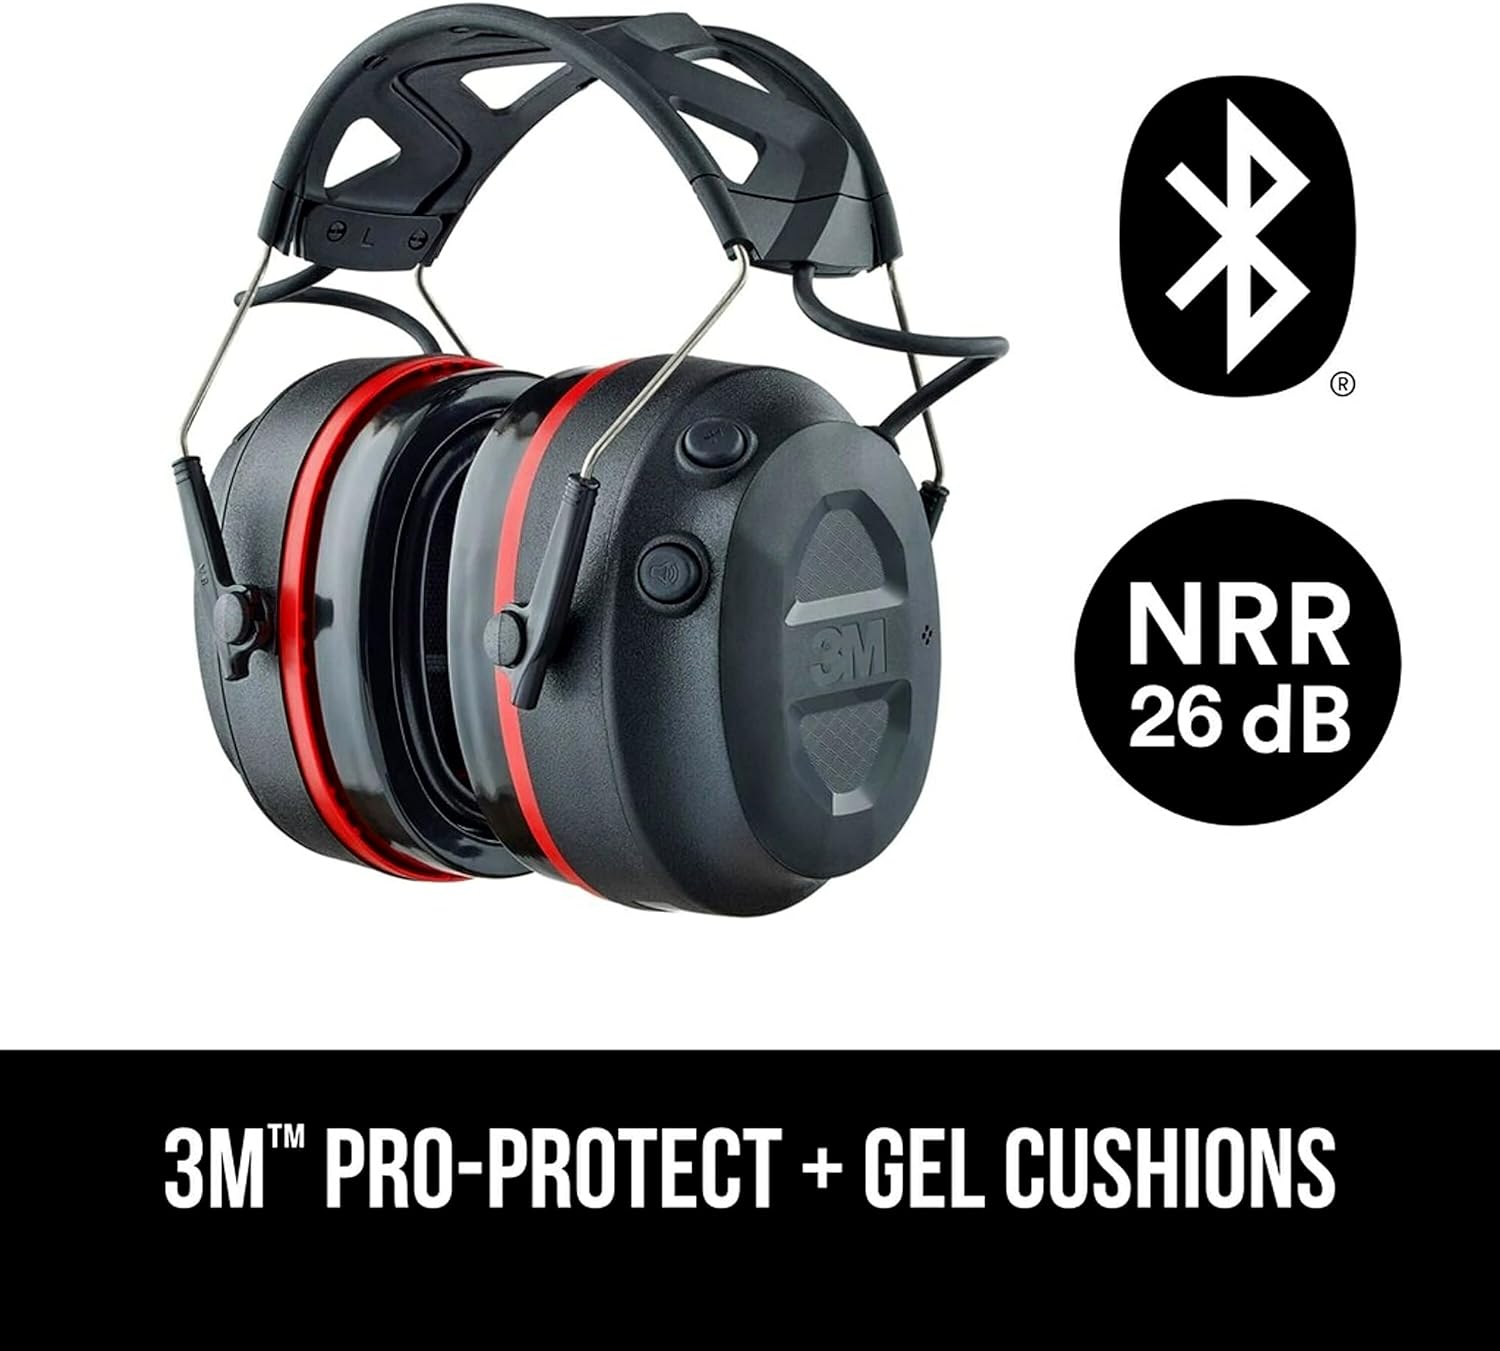 3M Pro-Protect + Gel Cushions Electronic Hearing Protector with Bluetooth Wireless Technology, NRR 26 dB, Black, Medium